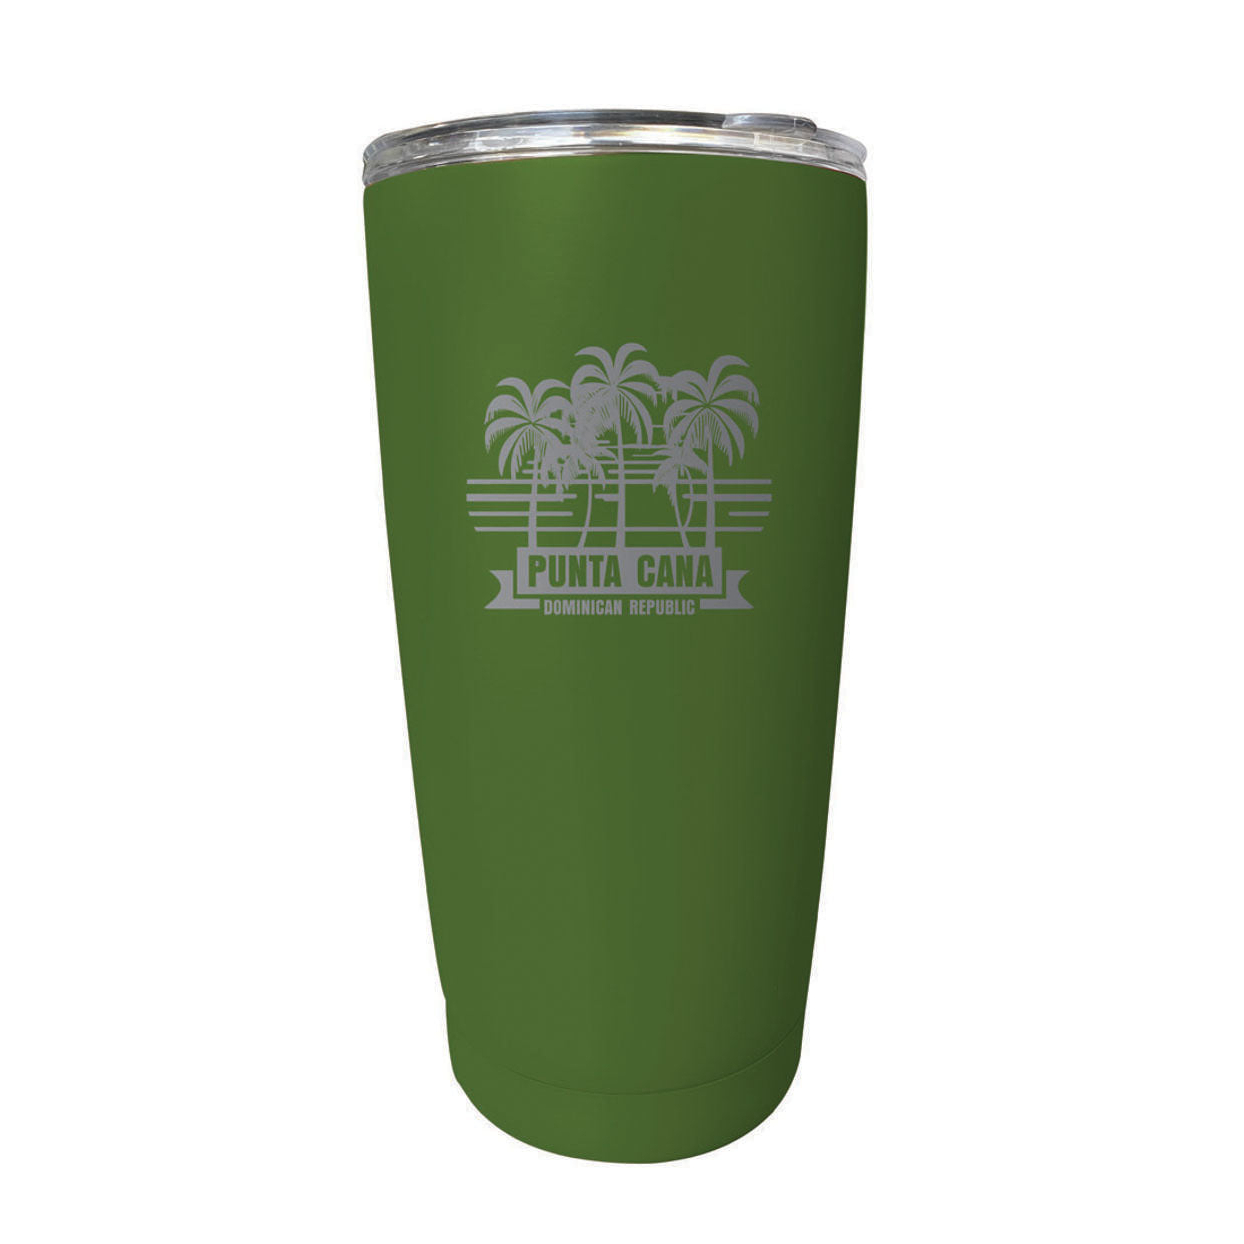 Punta Cana Dominican Republic Souvenir 16 Oz Stainless Steel Insulated Tumbler Etched - White, PALM BEACH